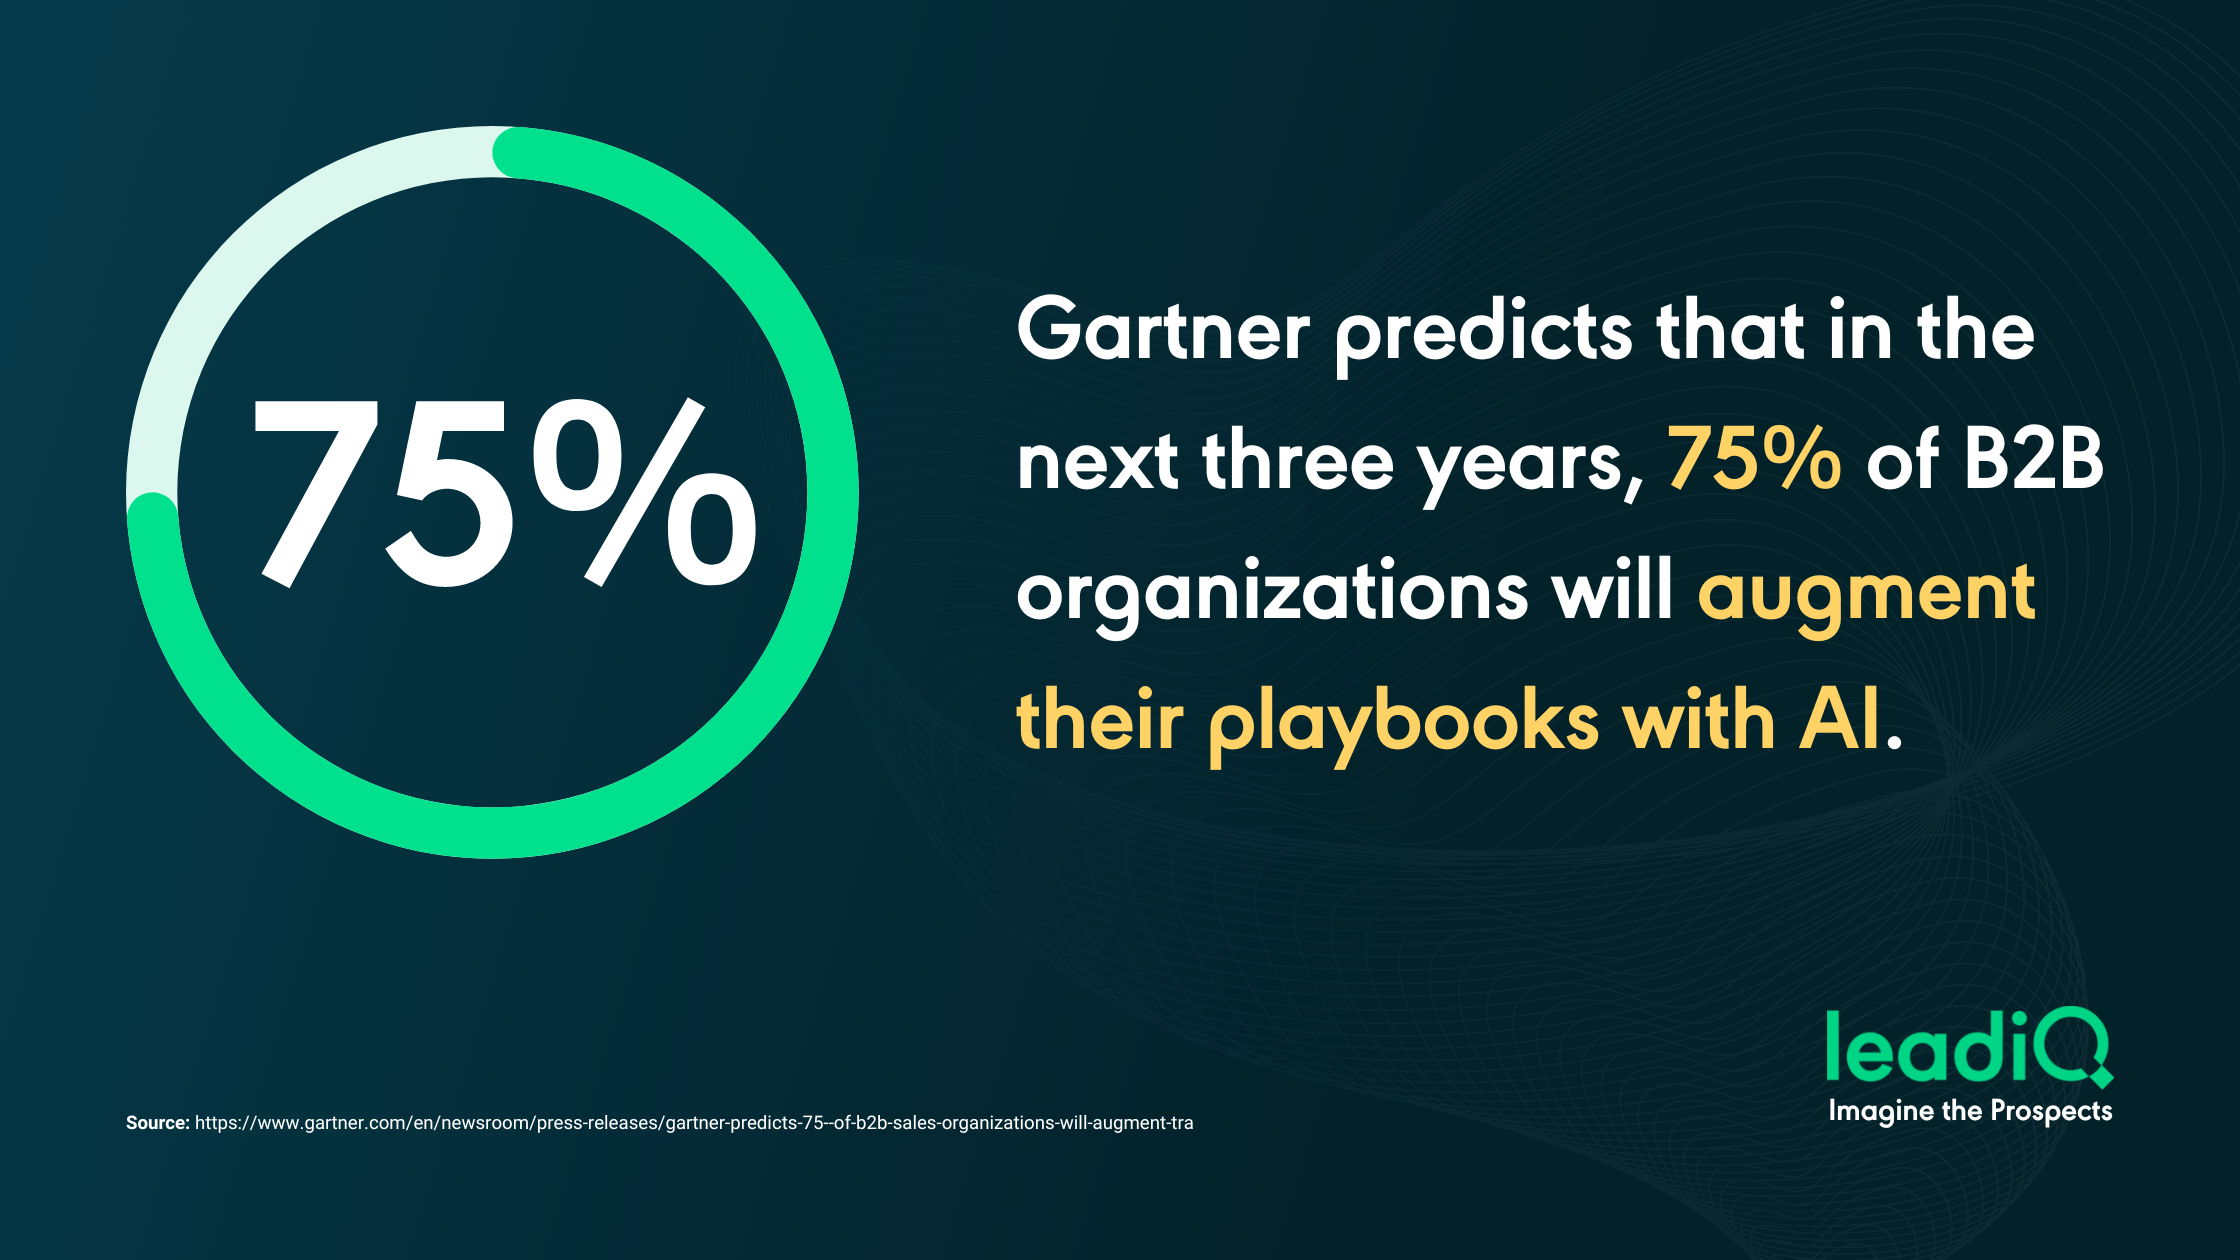 Statistic: Gartner predicts that in the next three years, 75% of B2B organizations will augment their playbooks with AI.